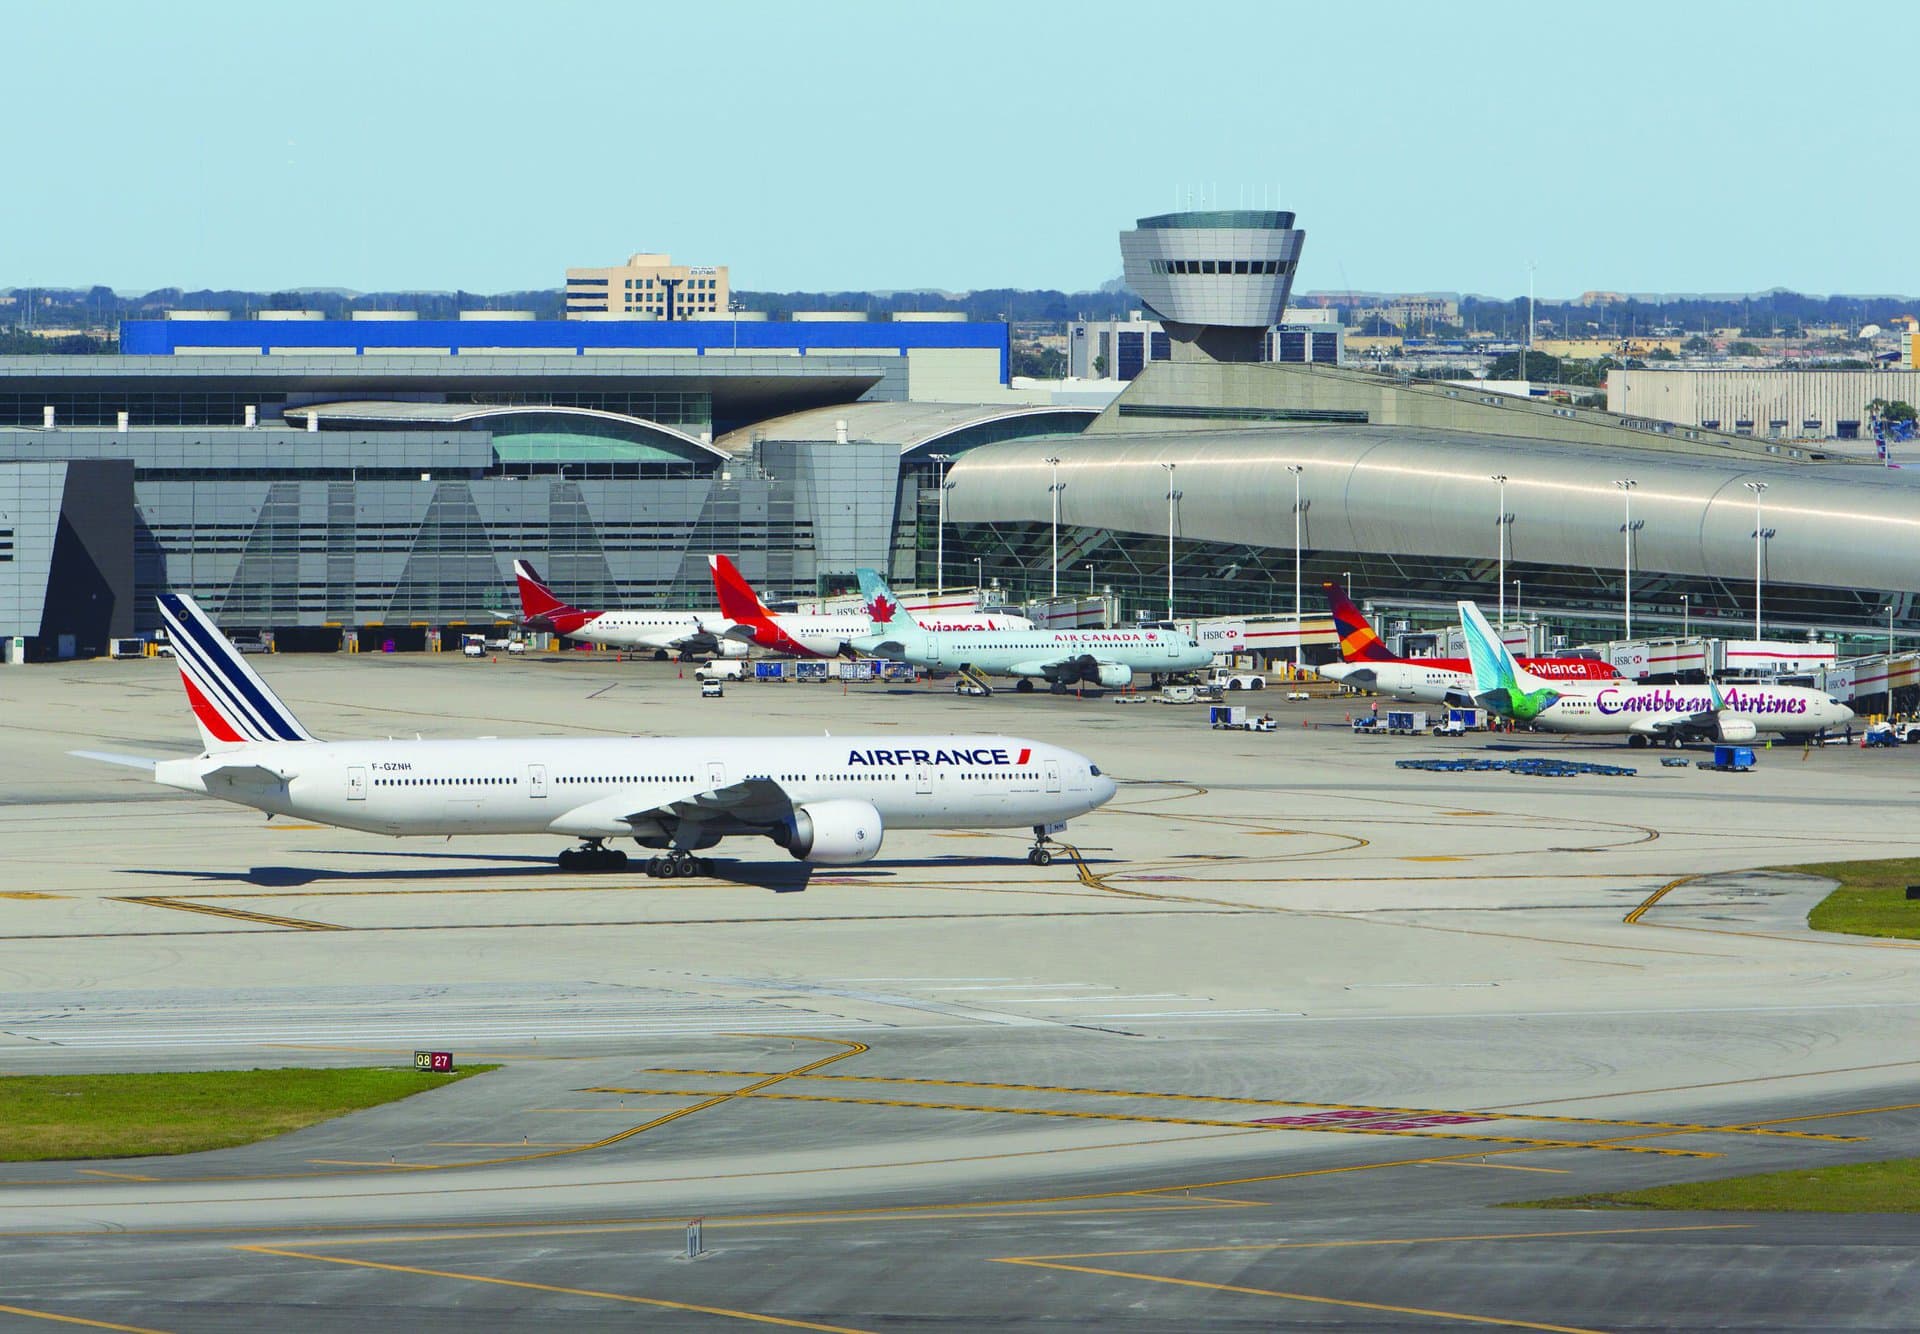 Miami International Is Now the Busiest Airport in Florida